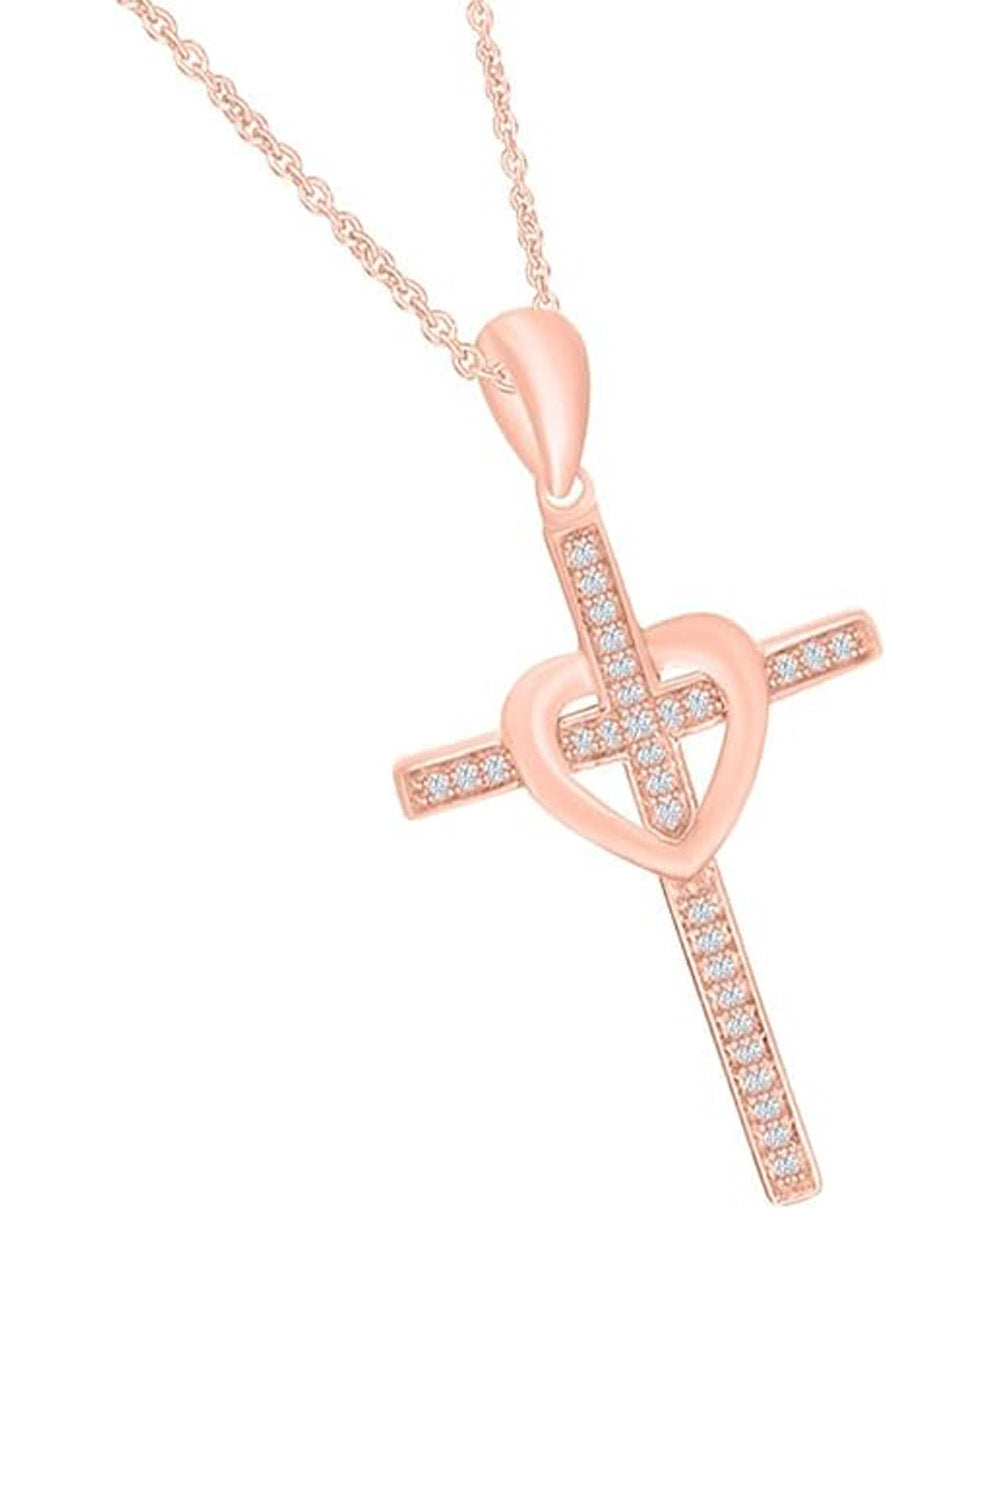 Rose Gold Color Heart Cross Pendant Necklace, Cross Necklace Religious